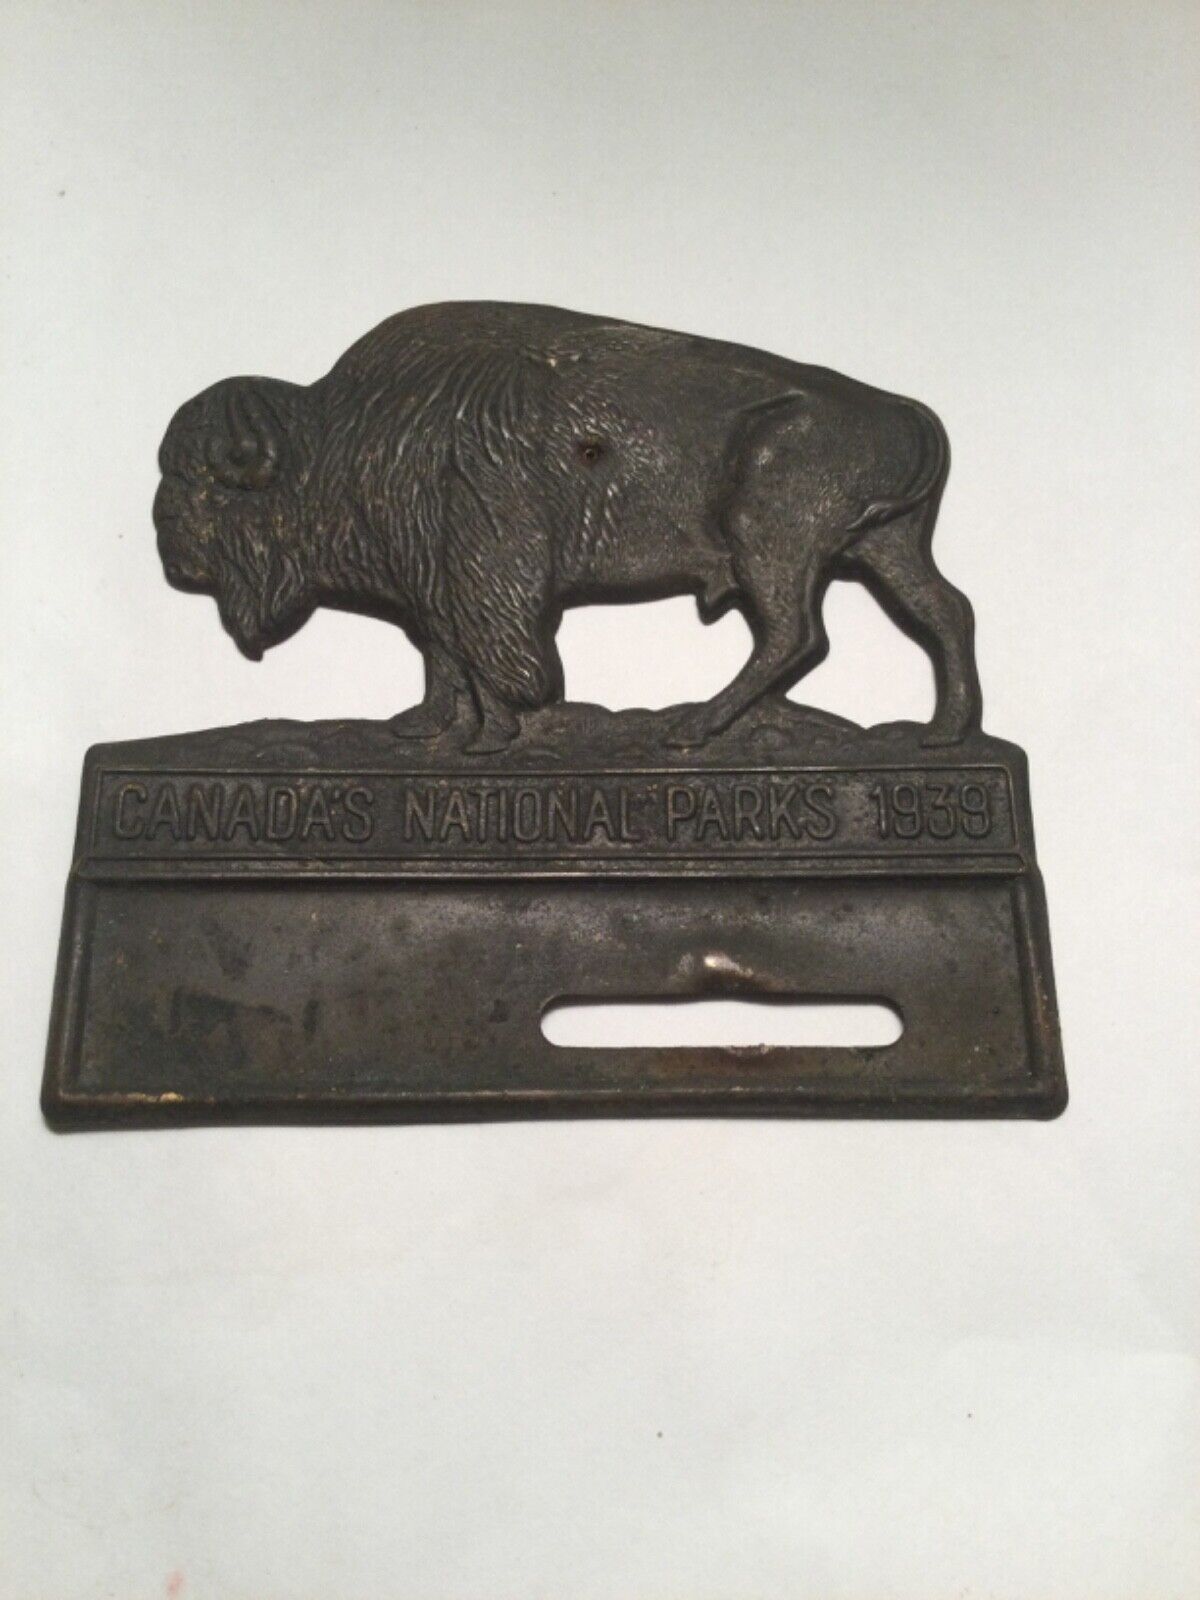 Rare Vintage 1939 CANADA’S NATIONAL PARKS BUFFALO LICENSE PLATE TAG TOPPER